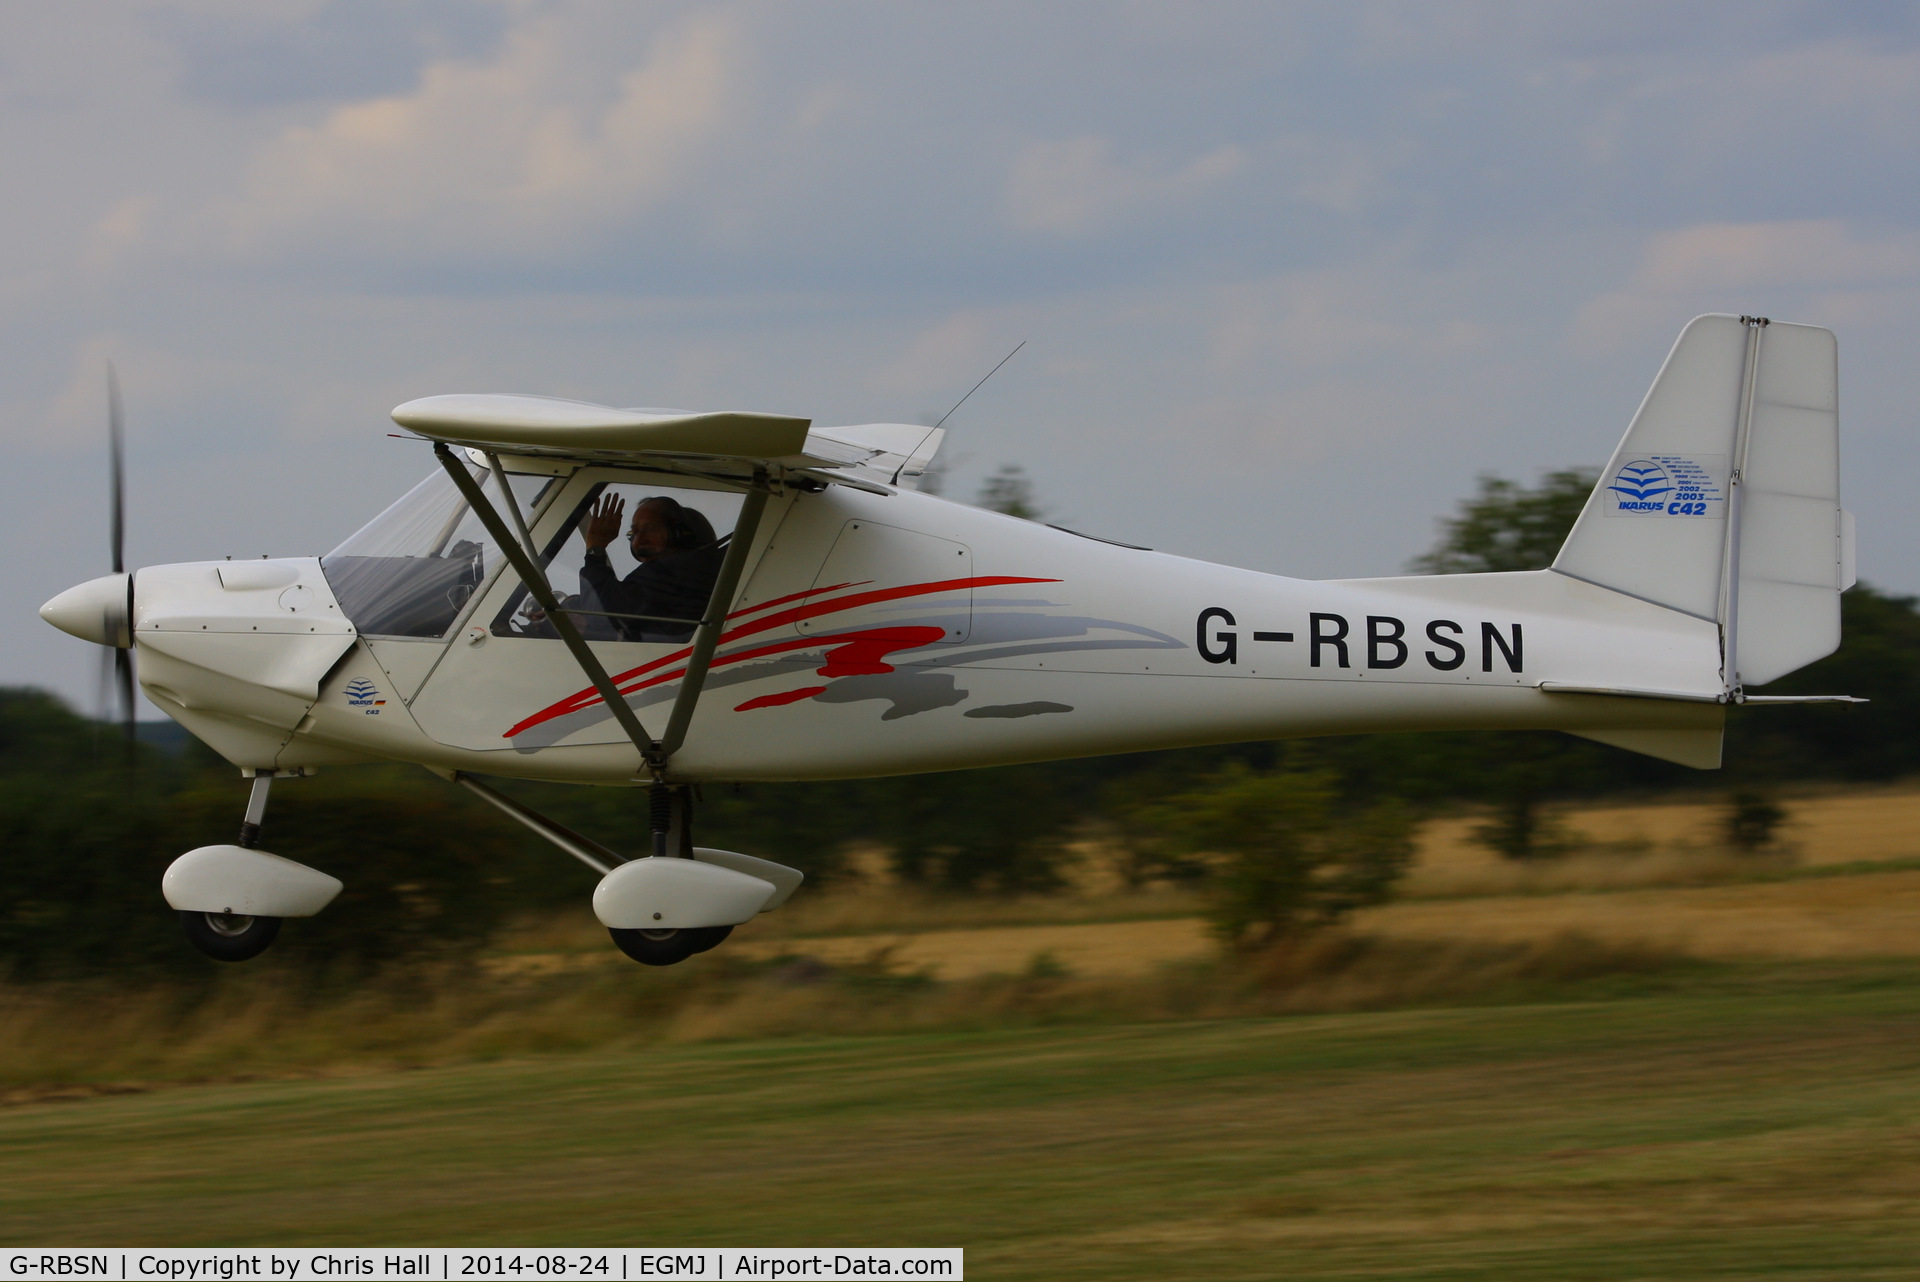 G-RBSN, 2004 Comco Ikarus C42 FB80 C/N 0407-6610, at the Little Gransden Airshow 2014